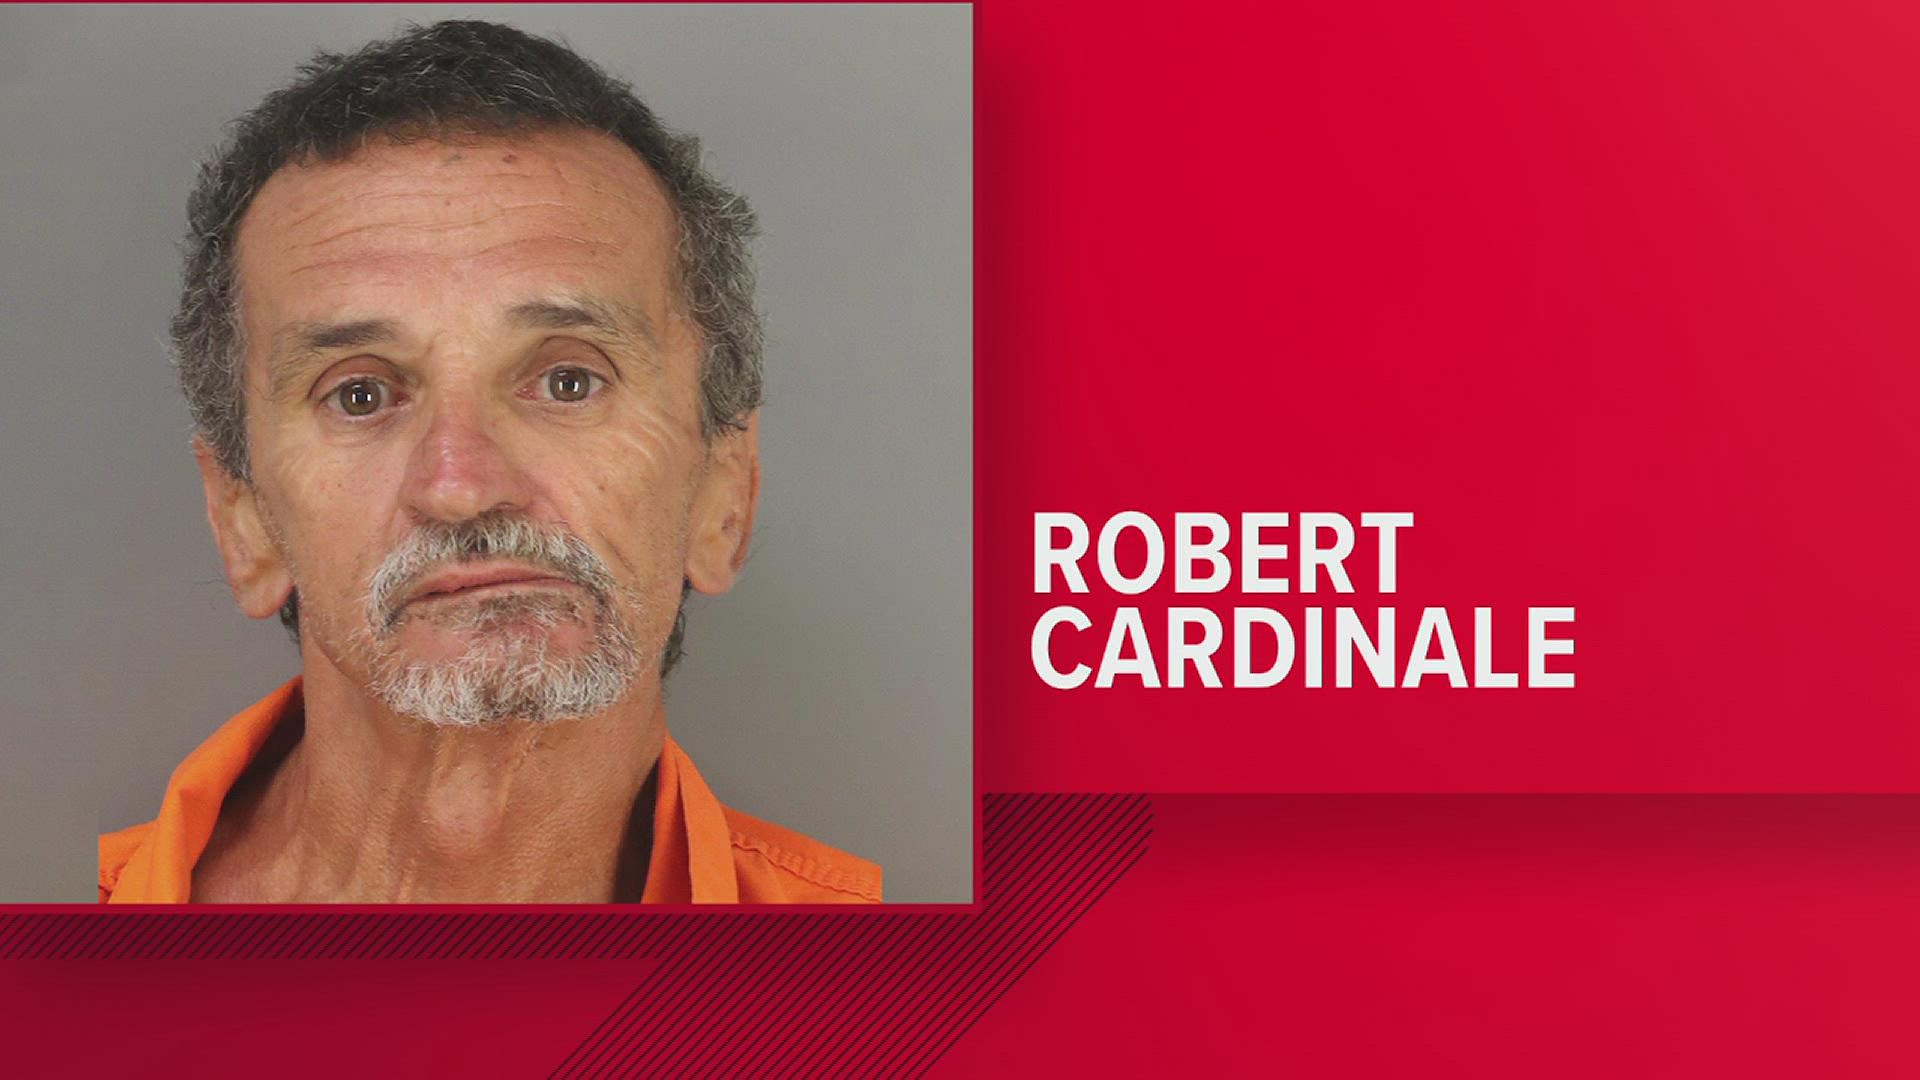 Robert Cardinale is being held in the Jefferson County Jail on a $500,000 bond.